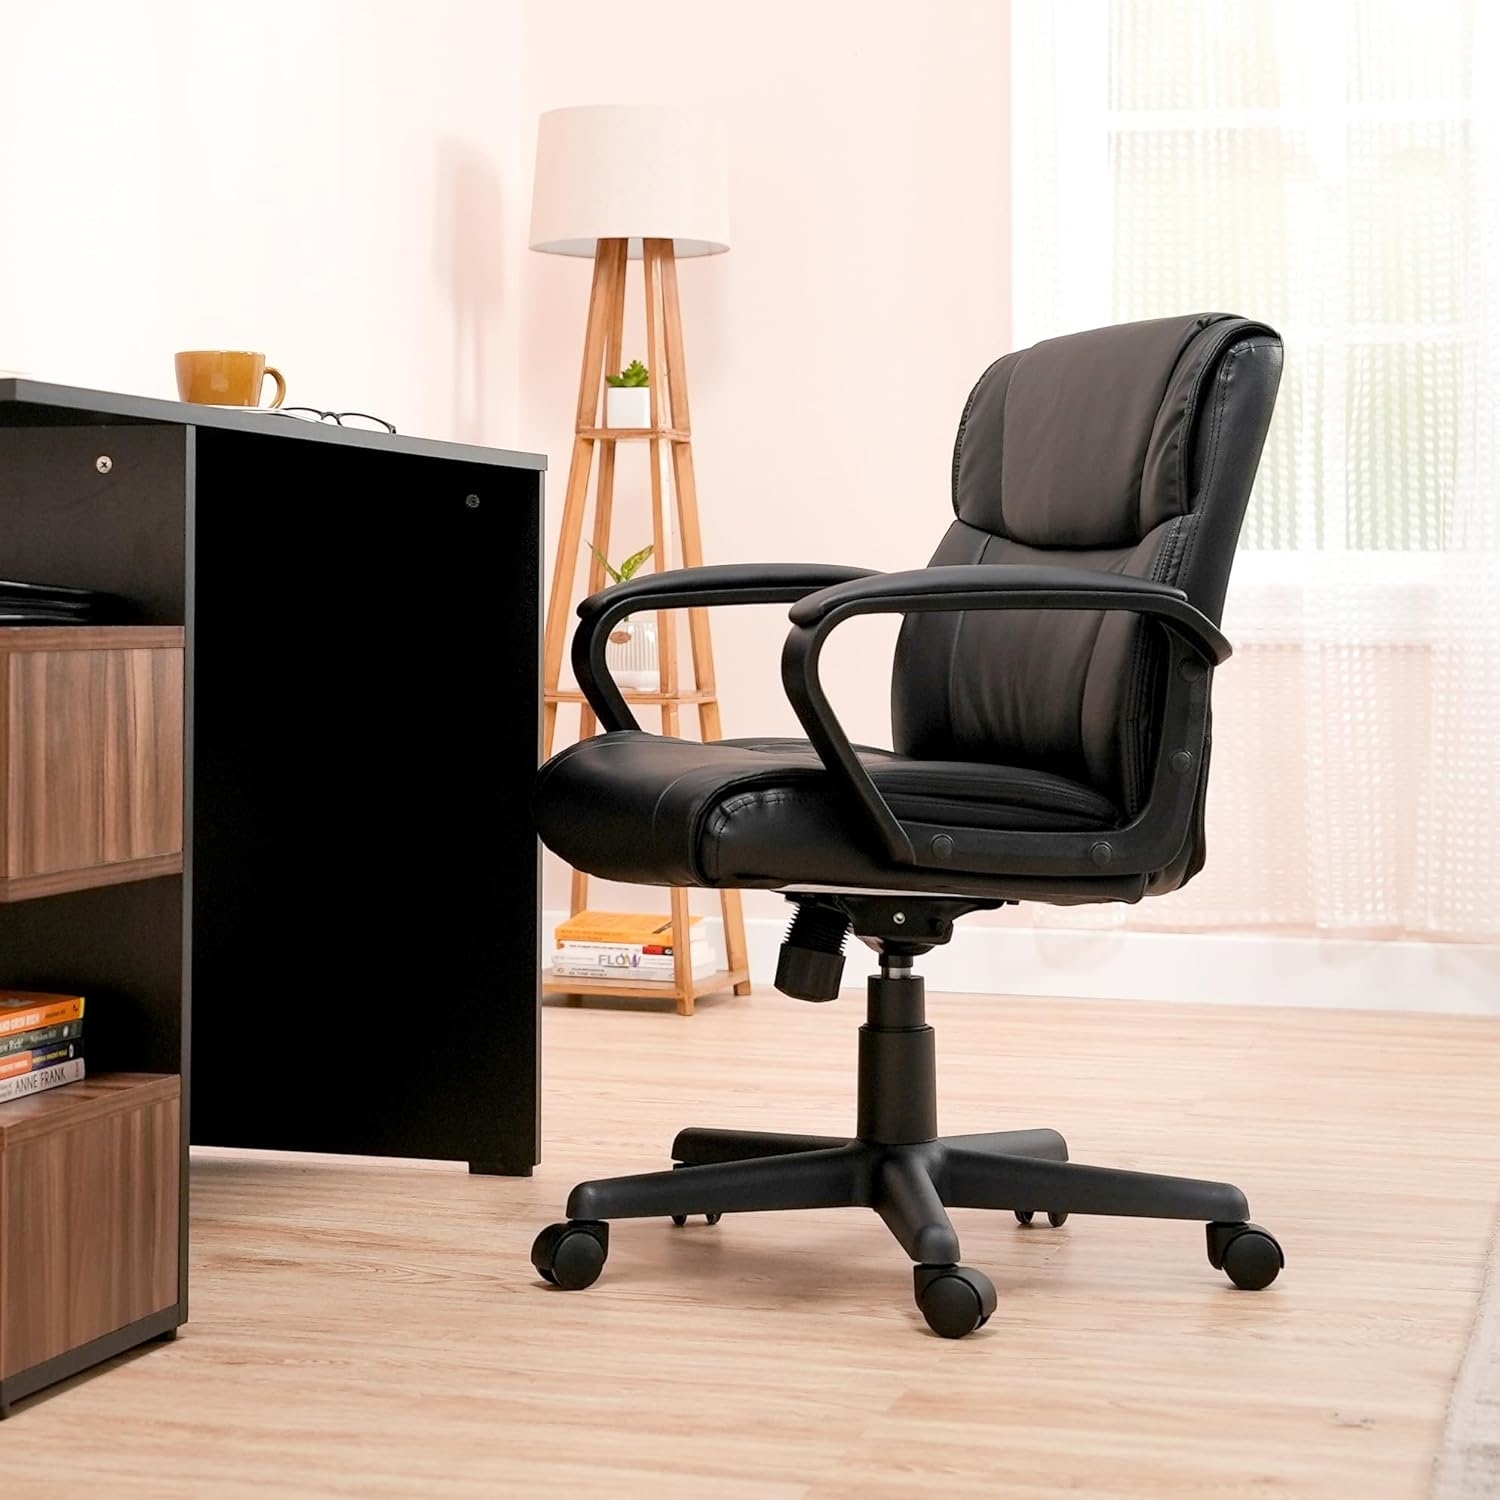 A black padded desk chair at a desk